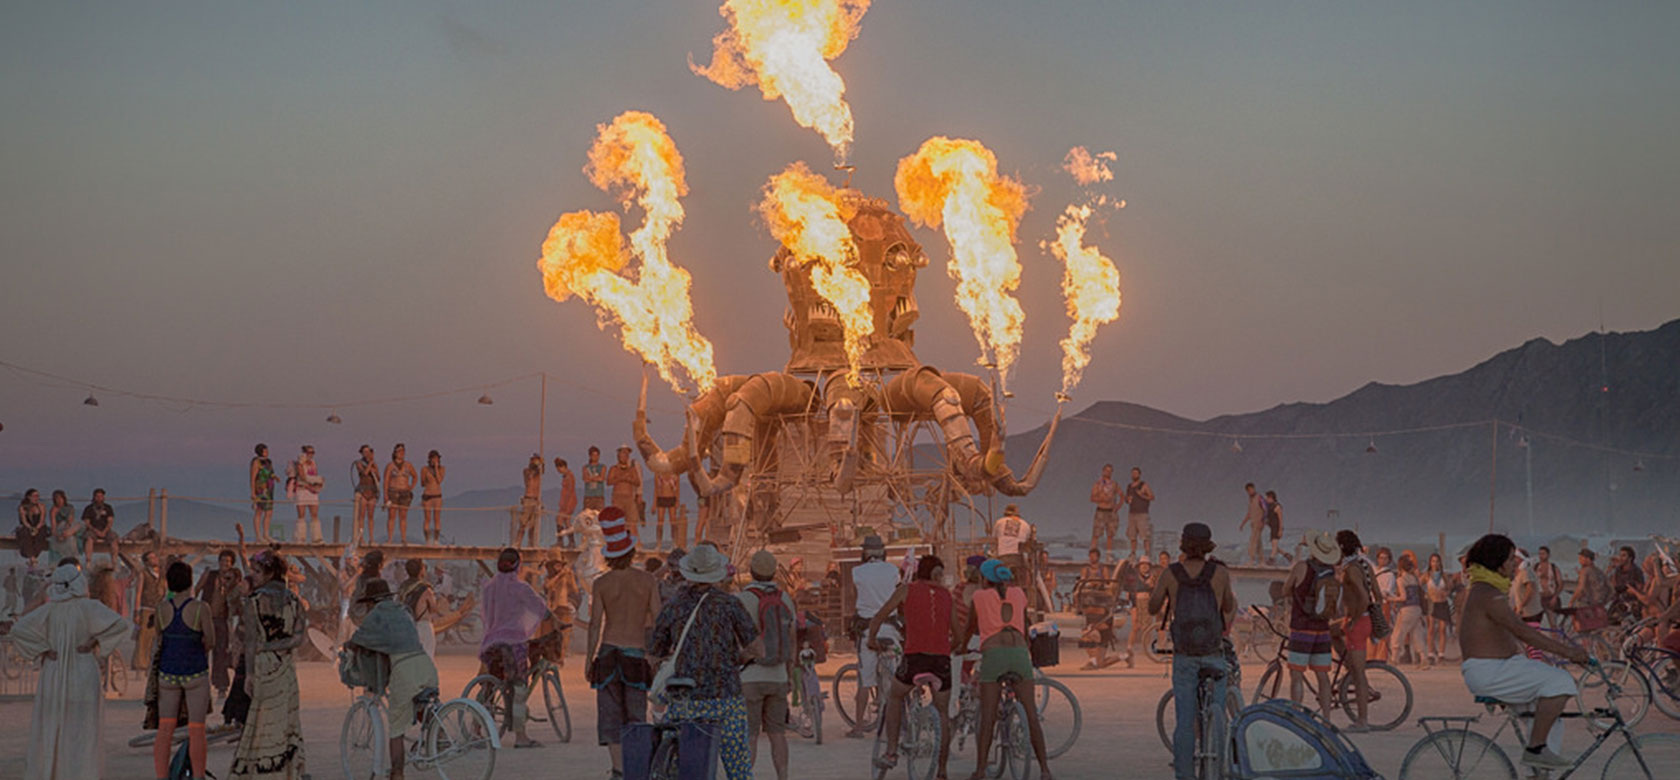 Mkw17 Burning Man Is Silicon Valley Tickets Tue 02 05 2017 At 12 00 Pm Eventbrite